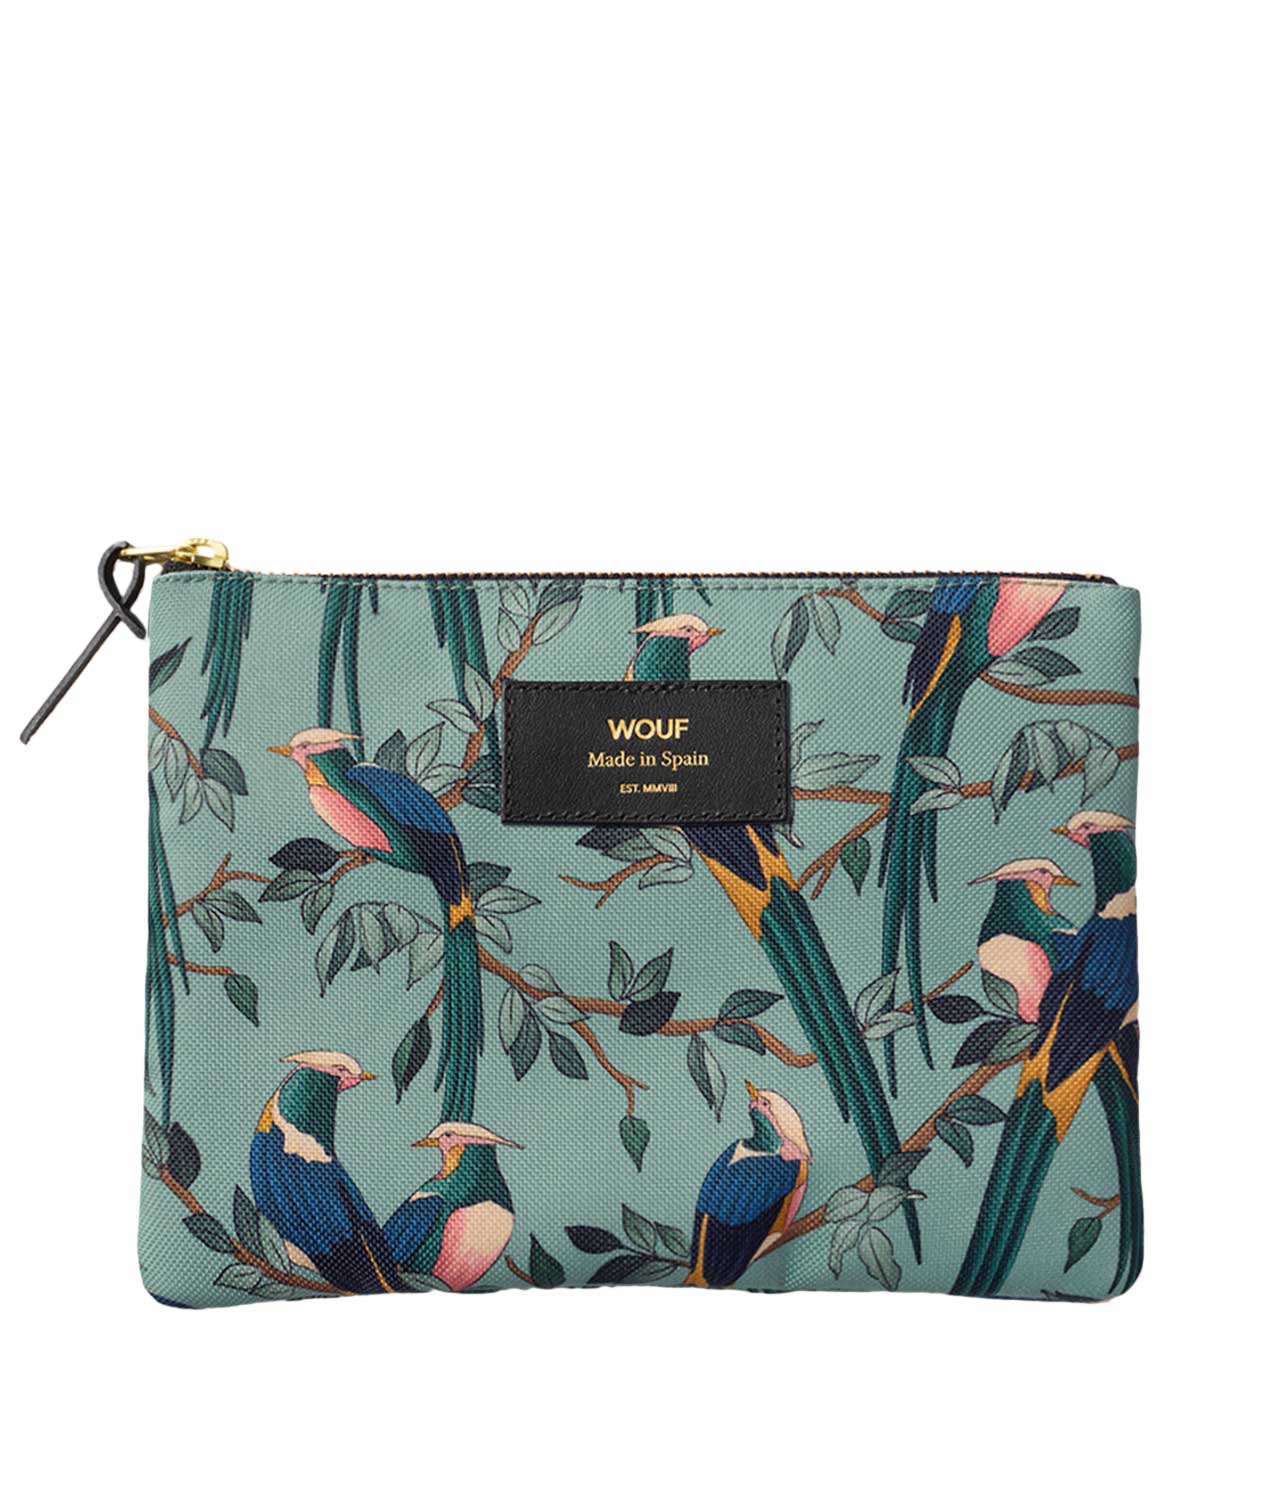 Wouf Suzanne Large Pouch